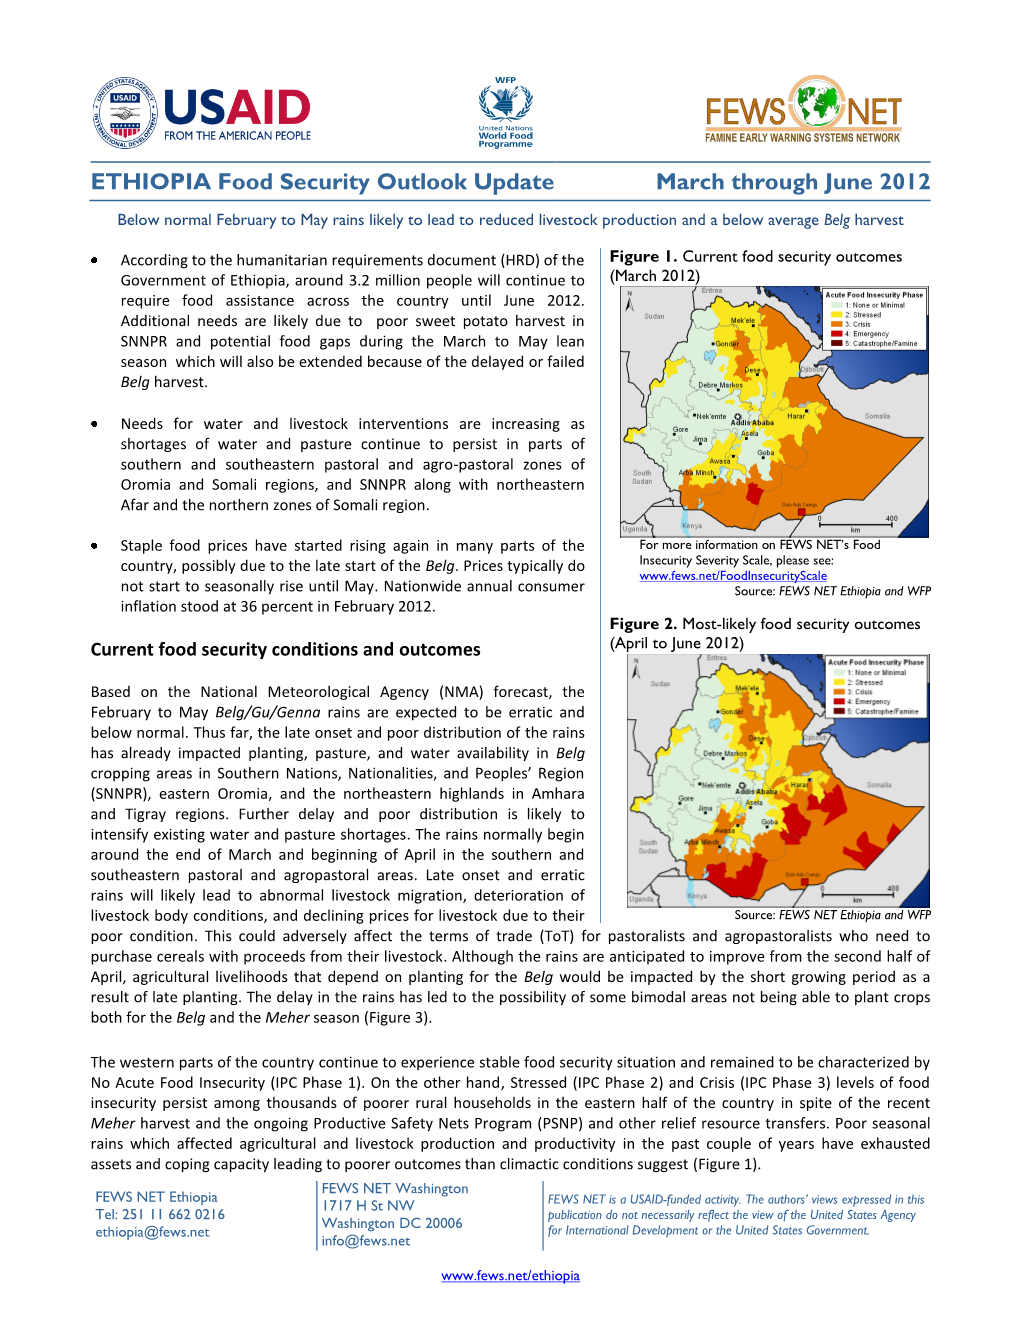 ETHIOPIA Food Security Outlook Update March Through June 2012